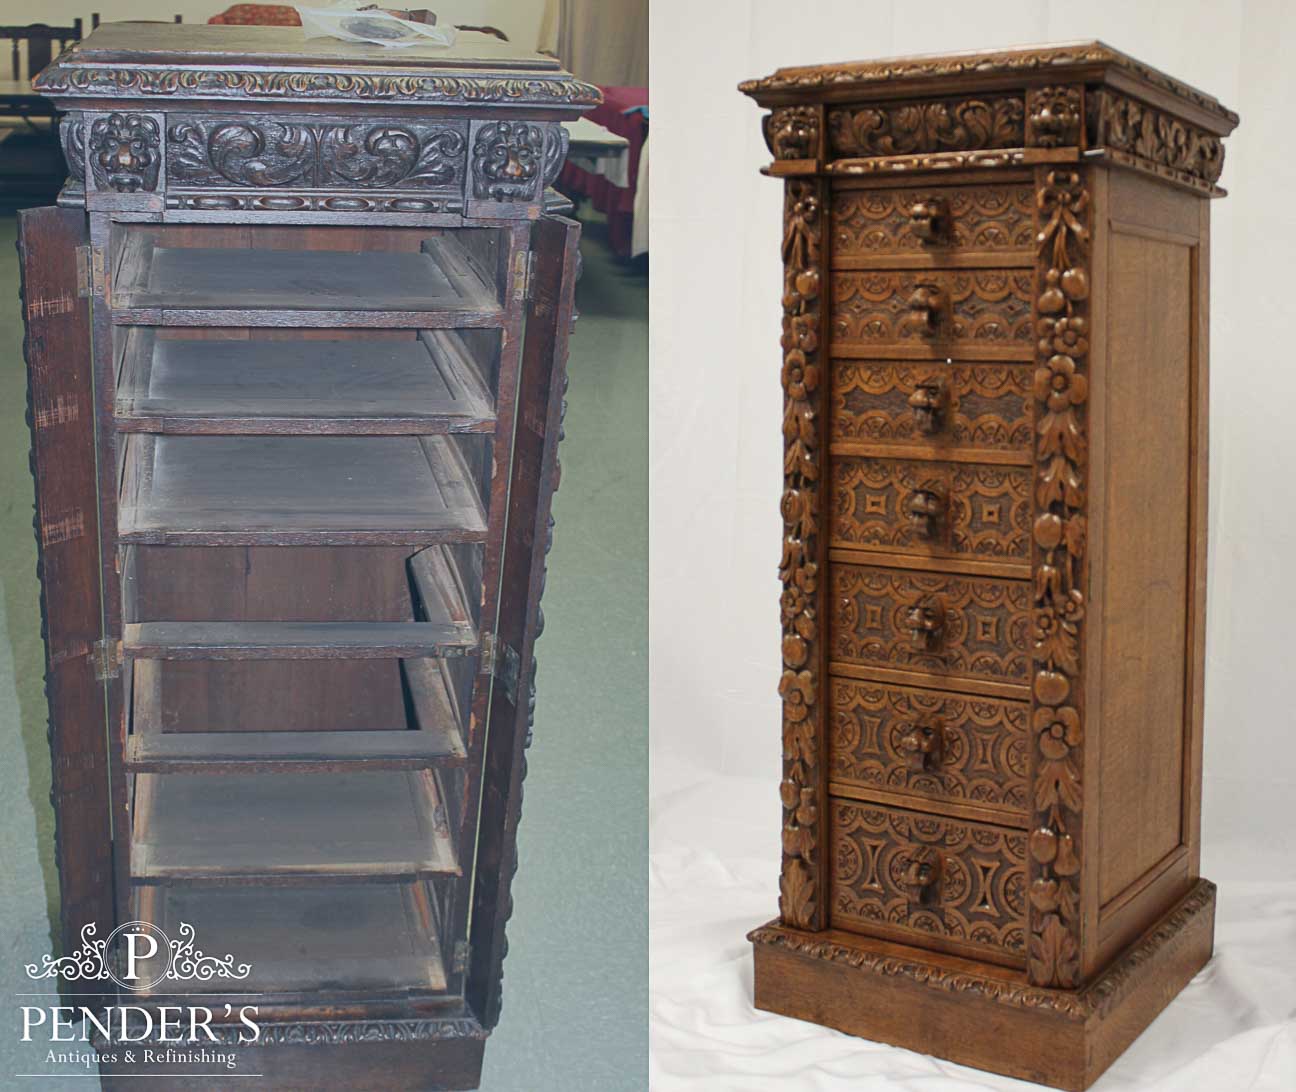 An intricately carved wooden dresser that has been restored